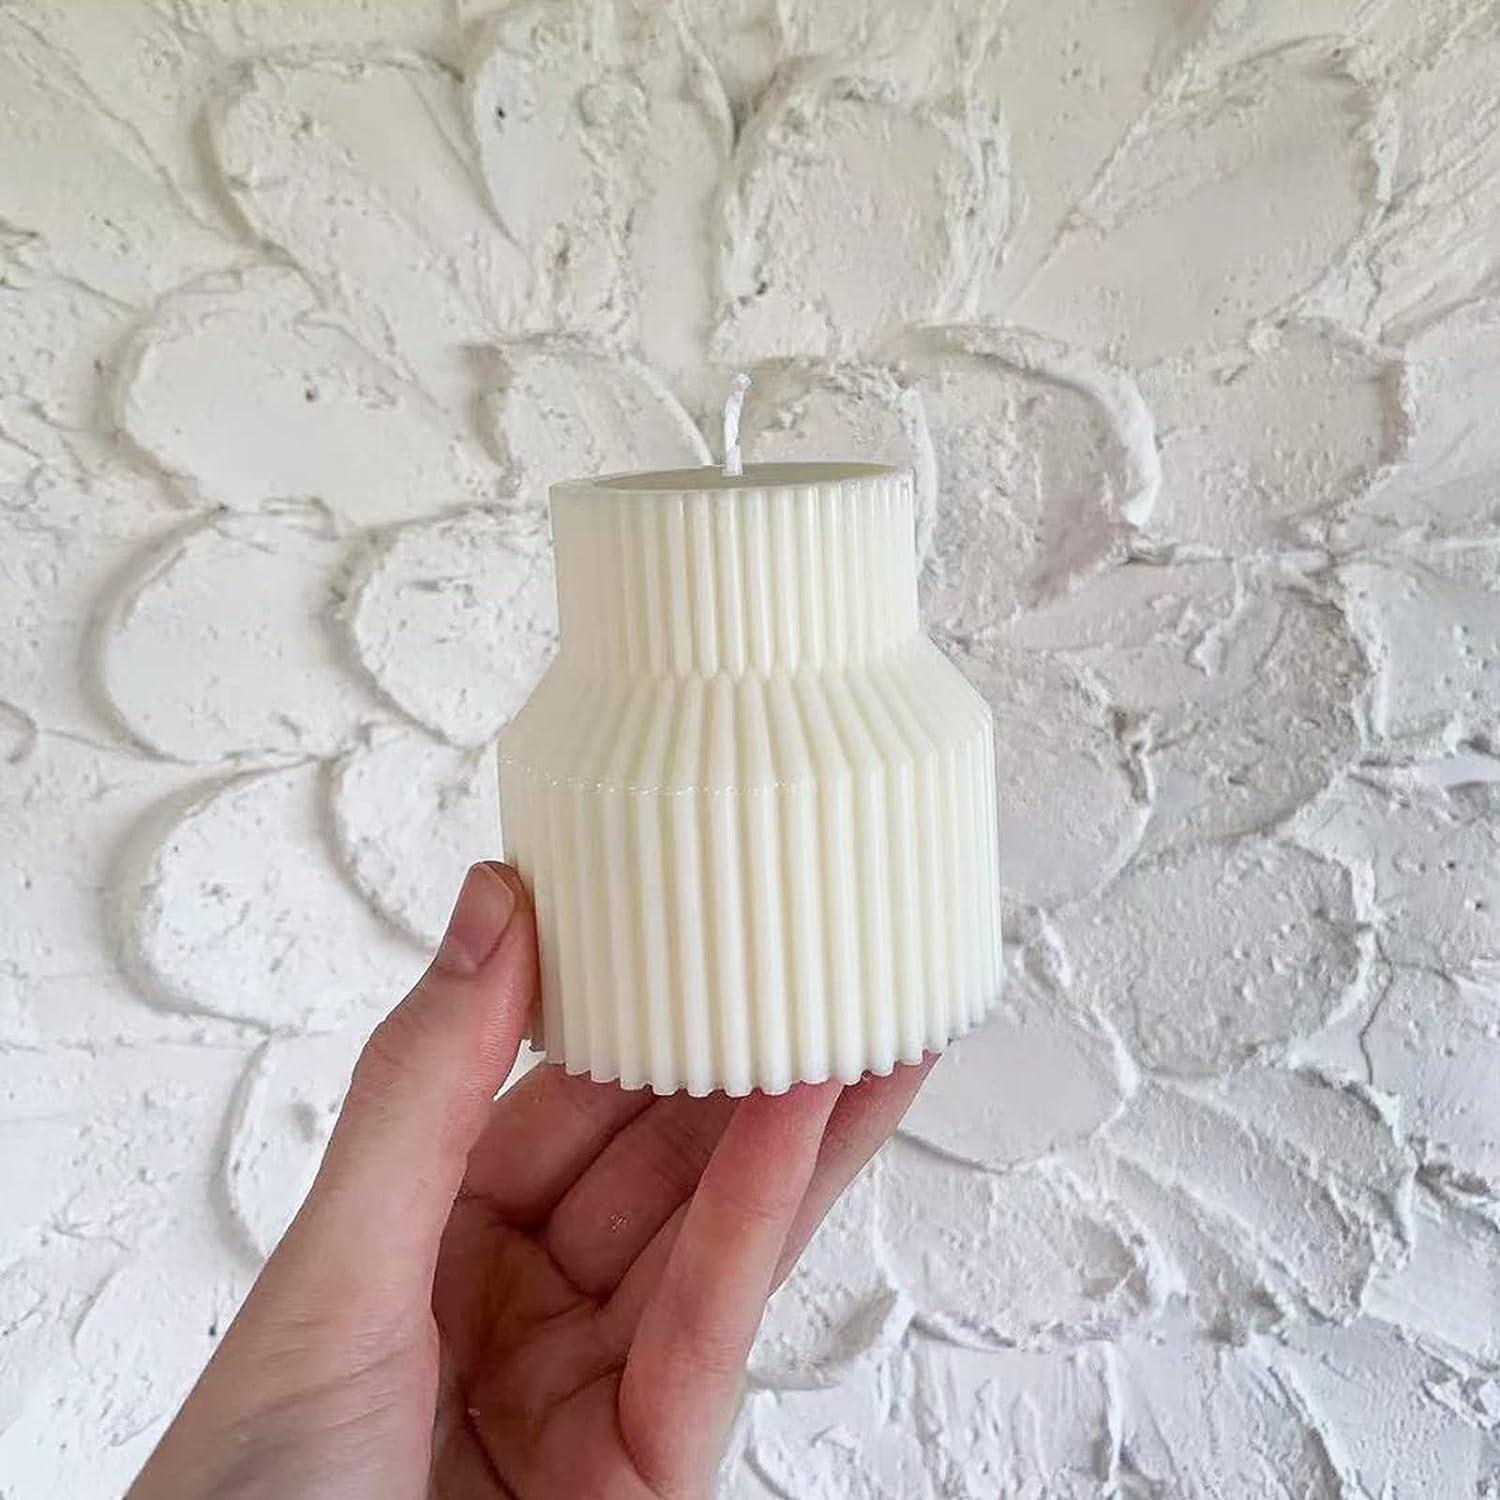 Ribbed Pillar Candle Silicone Mold